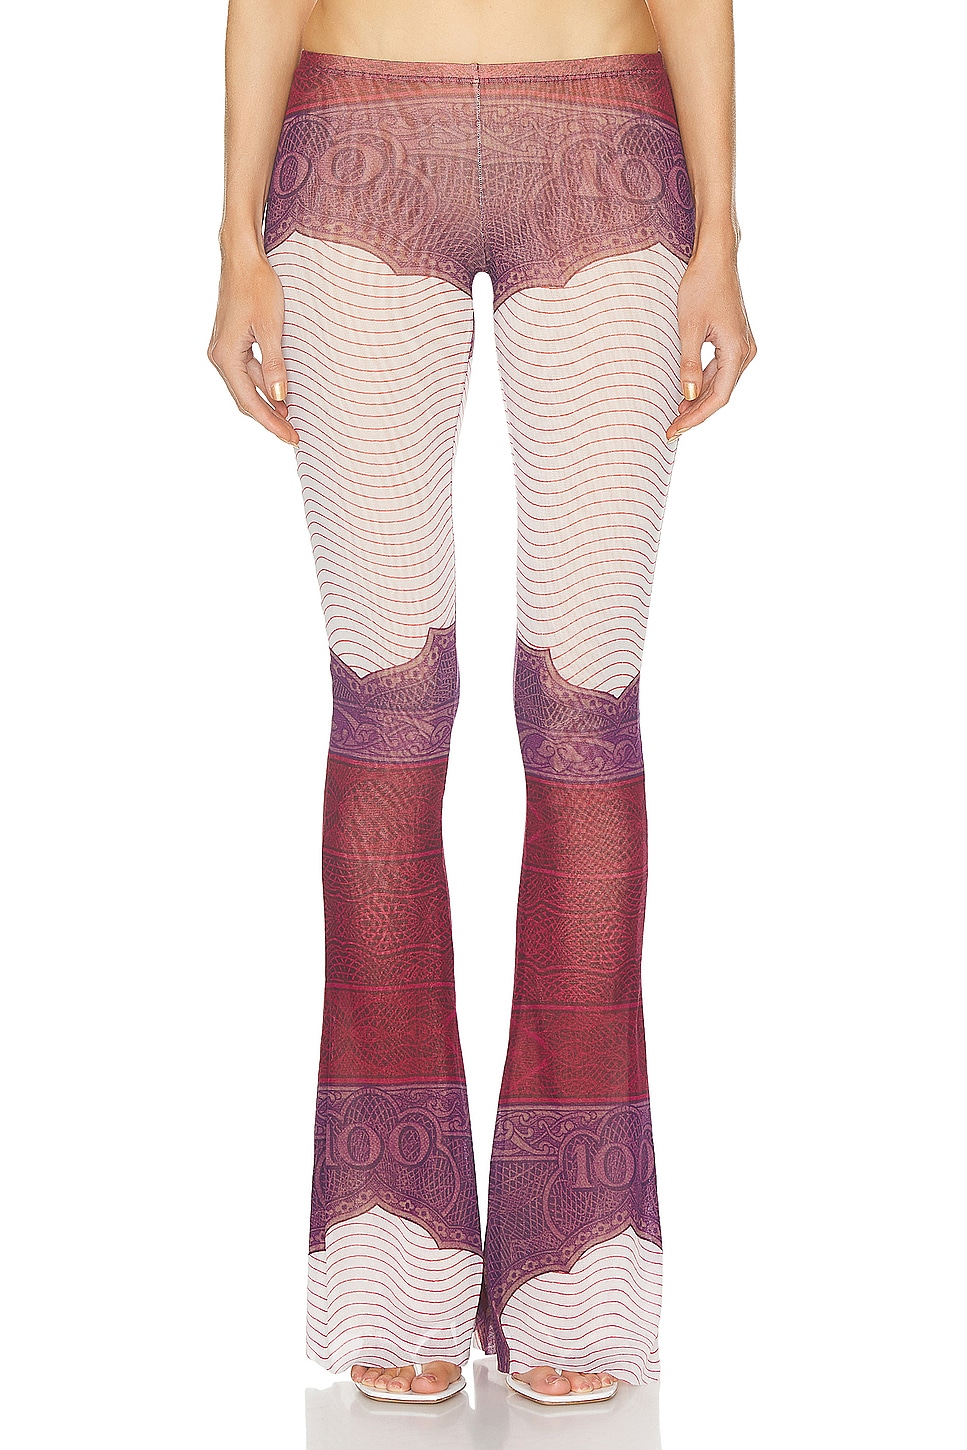 Image 1 of Jean Paul Gaultier Cartouche Mesh Flare Pant in Red, White, & Burgundy